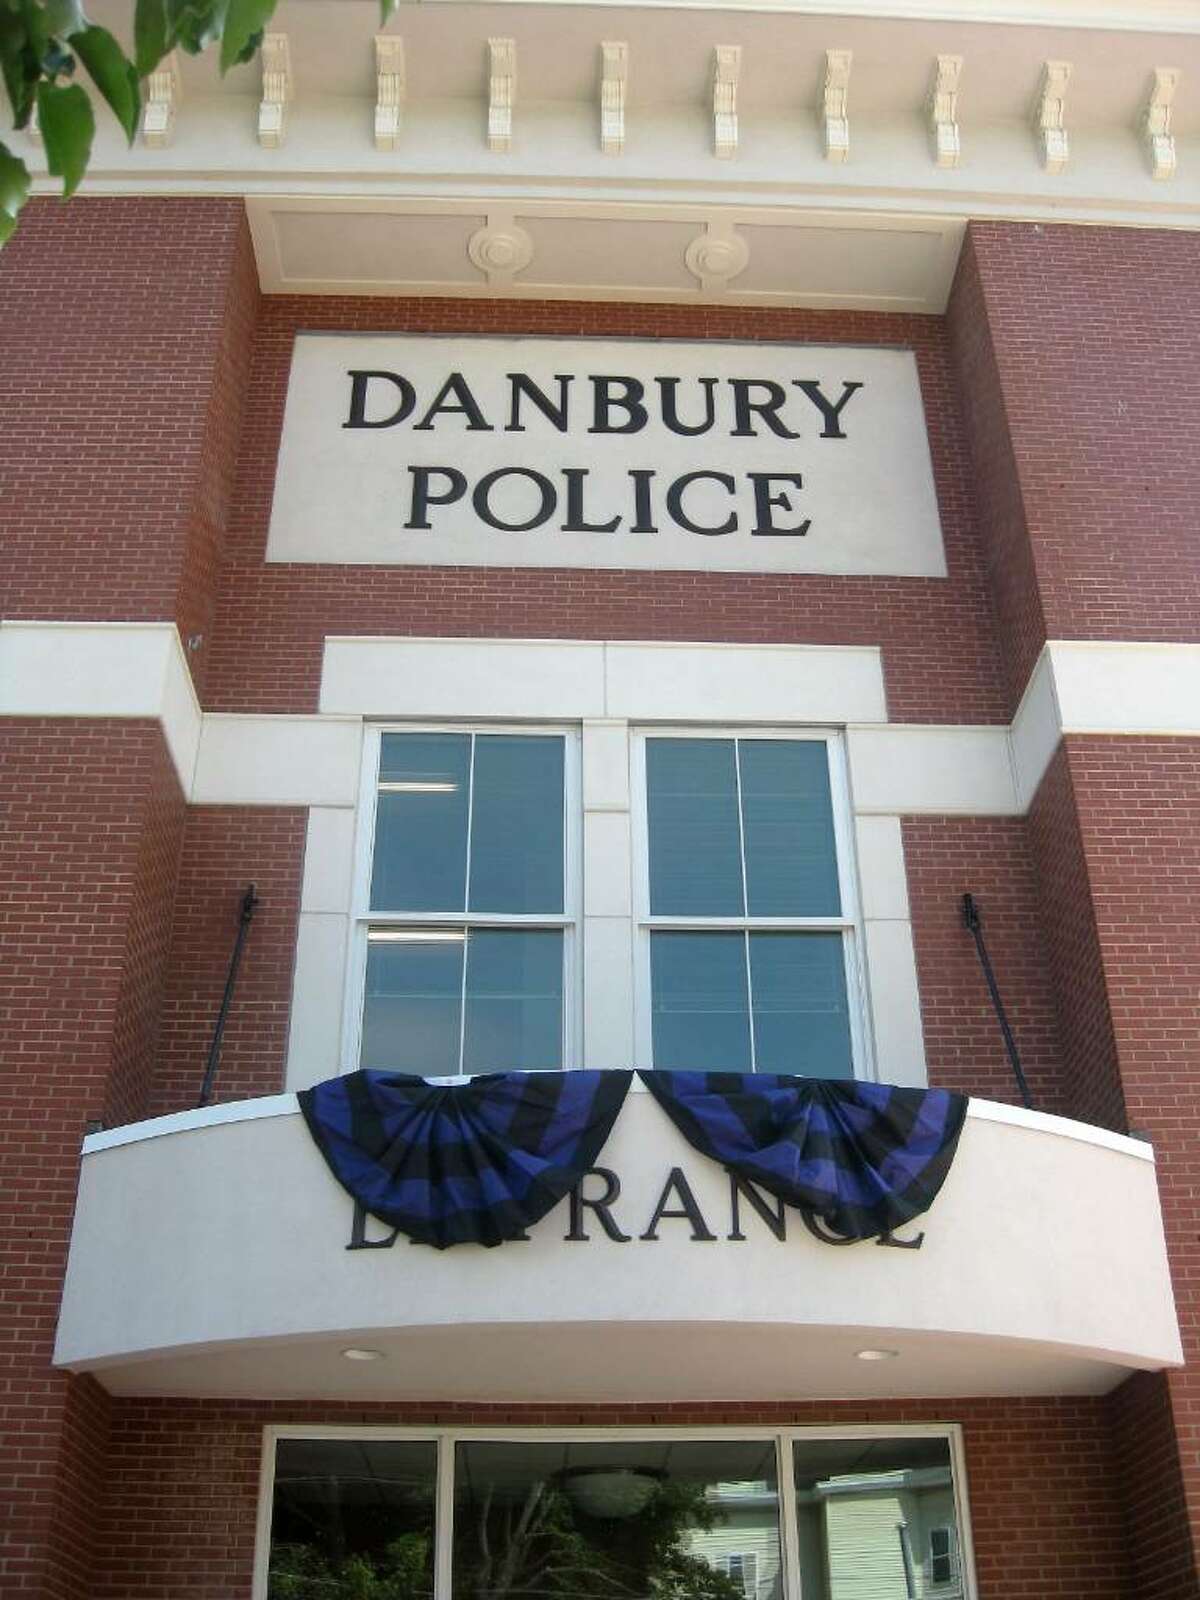 Memorial bunting was placed at the entrance of police headquarters Friday, June 4, 2010 in honor of officer Donald Hassiak who was killed in a hit and run accident Thursday night.